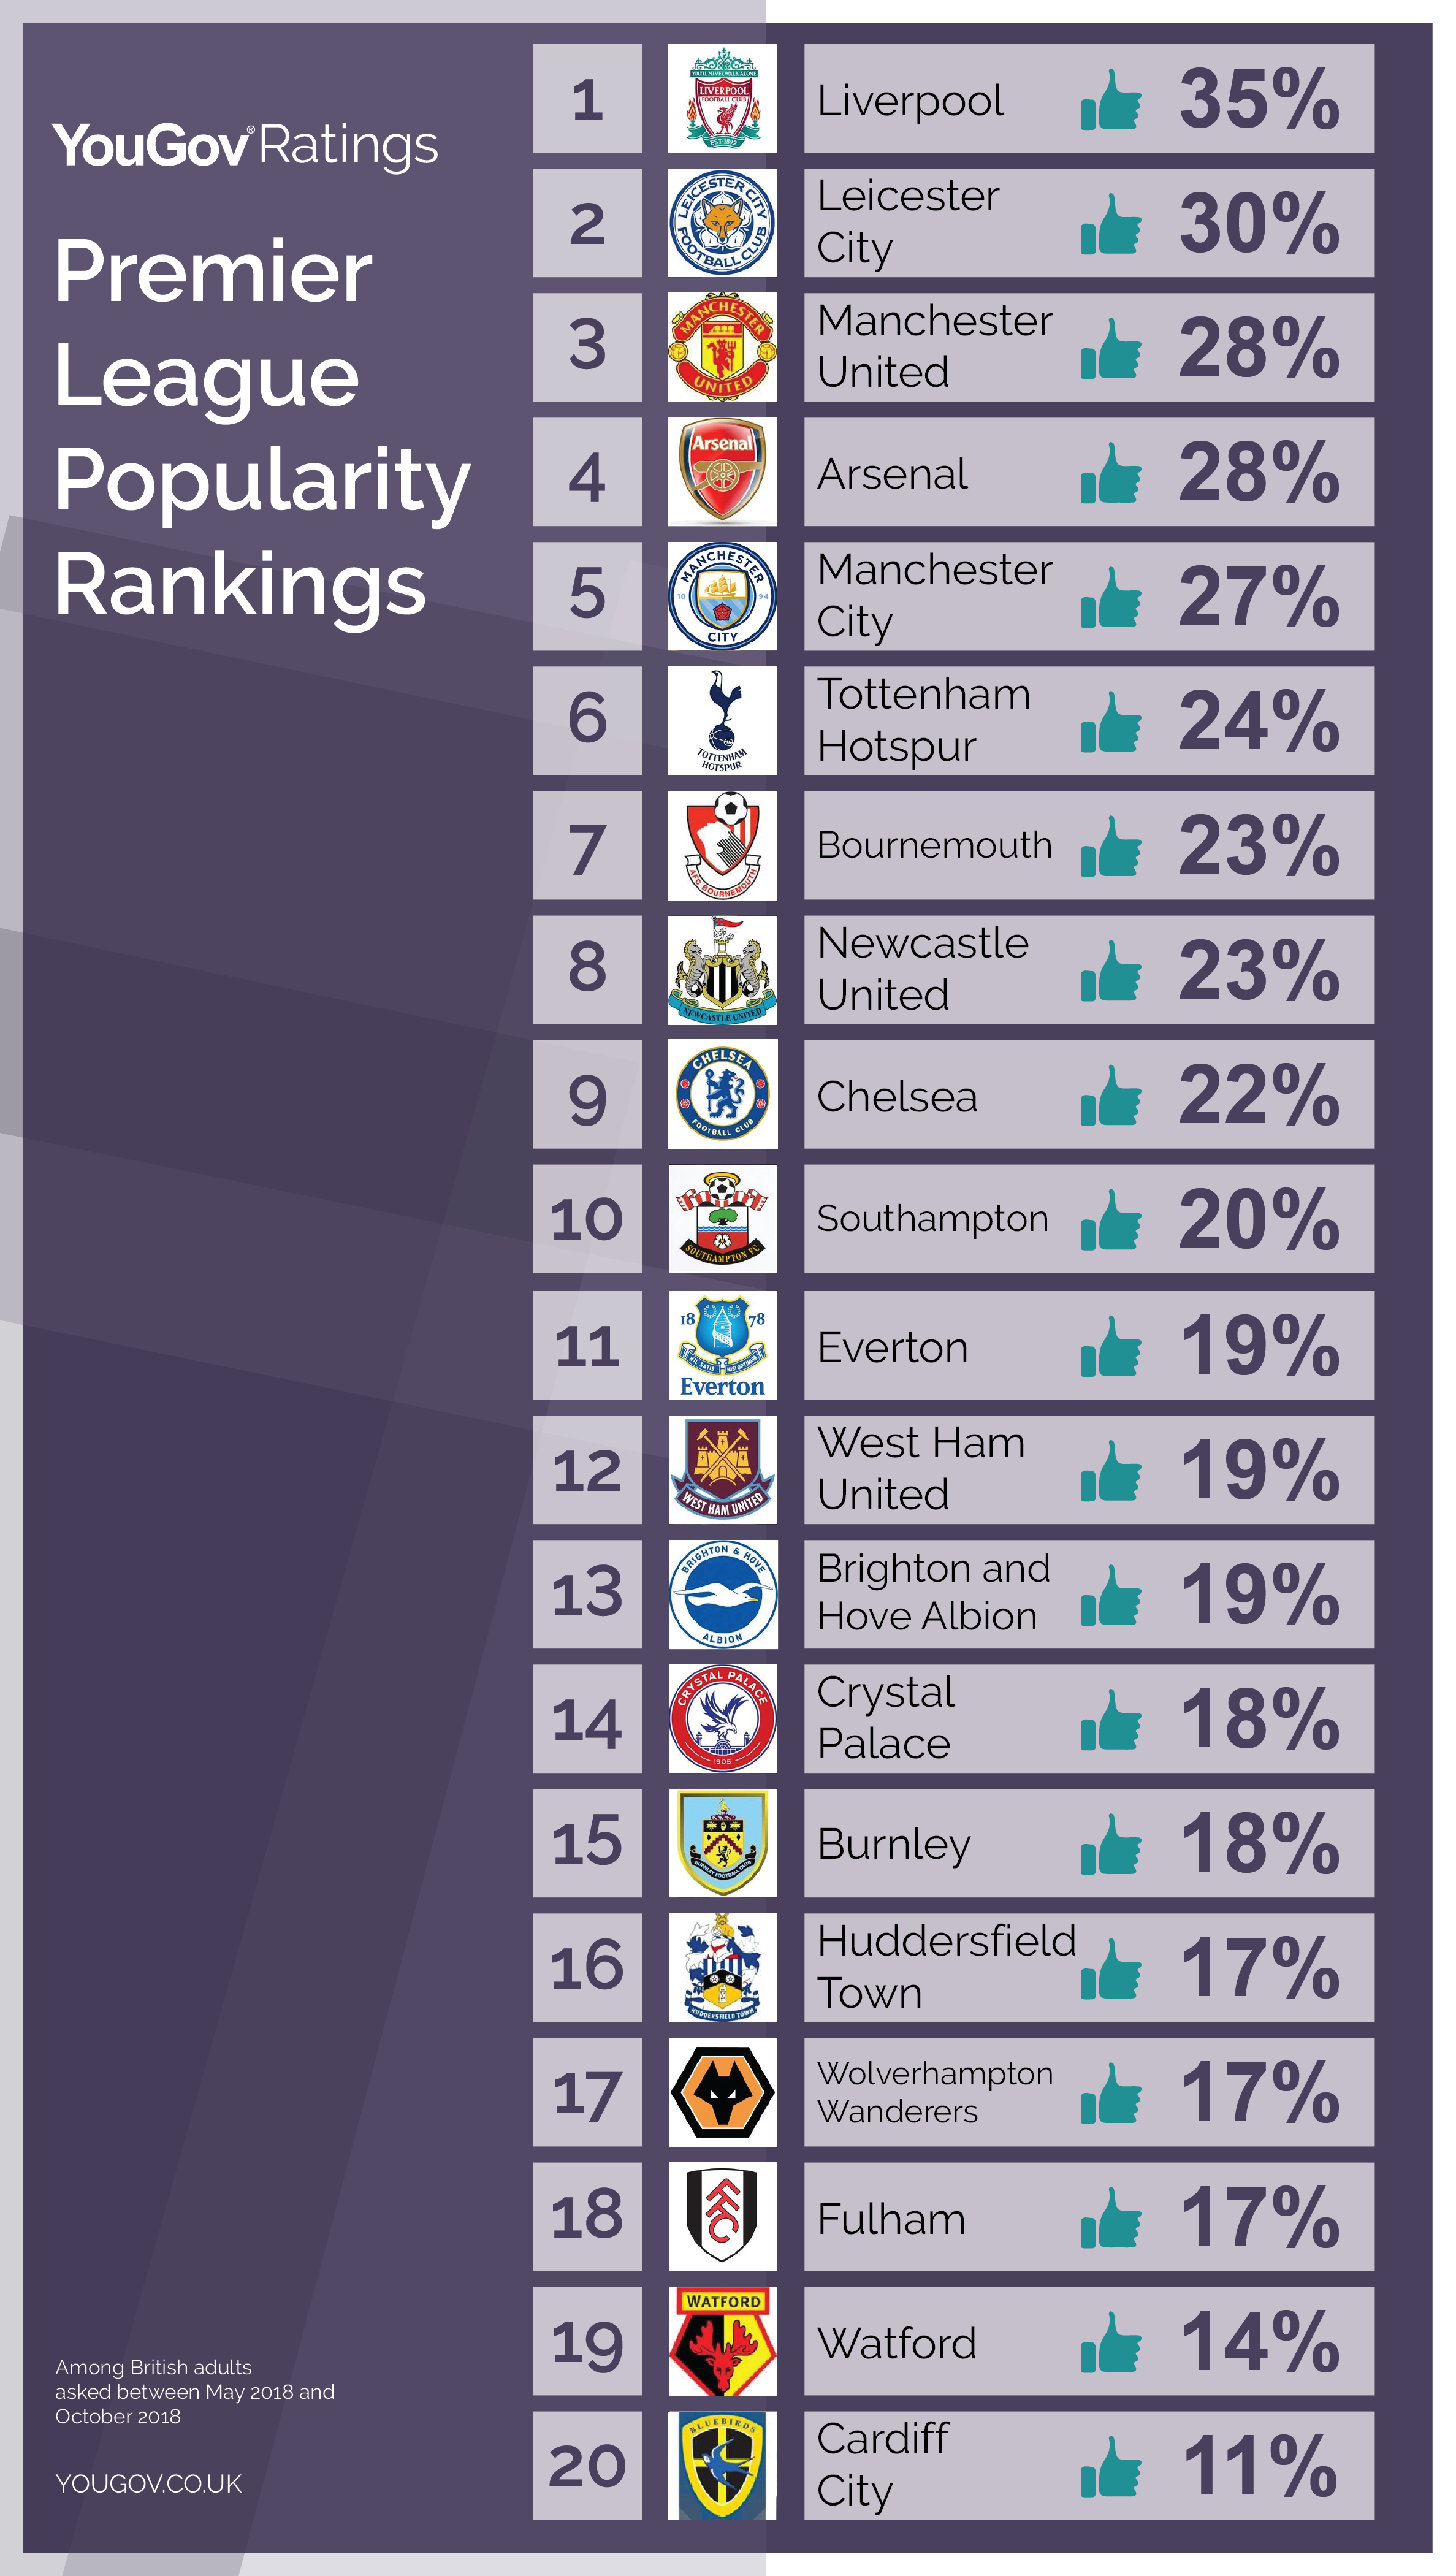 Liverpool Takes The Top Spot In The Premier League Popularity